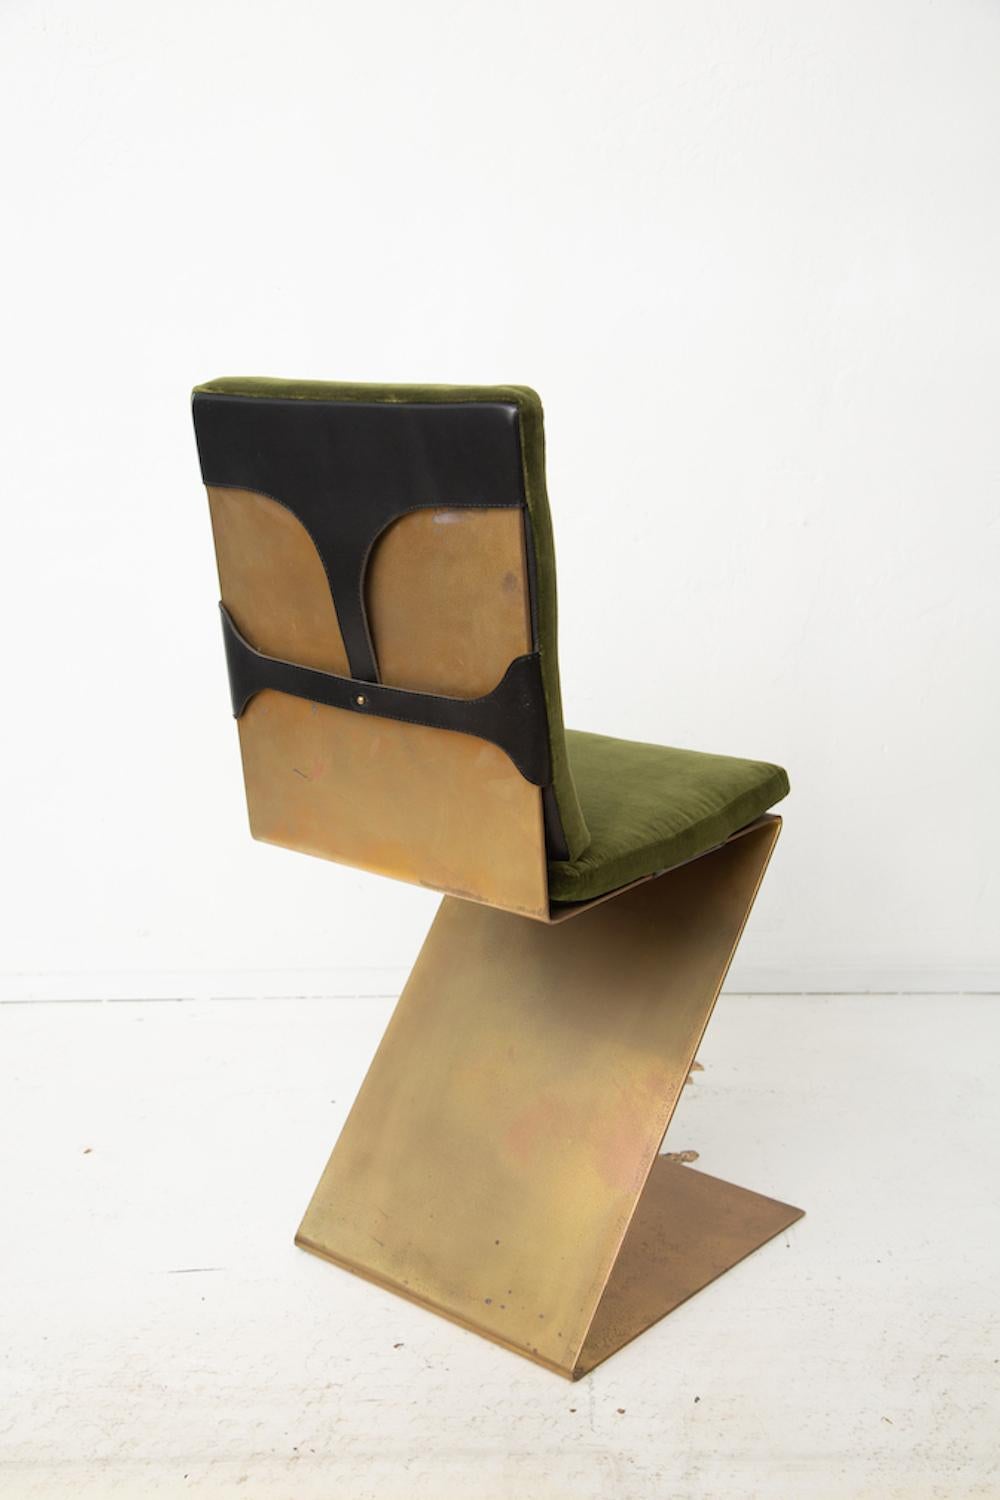 Four Brass Rietveld Style Zig Zag Chairs with Leather and Velvet Seat Cushions 1